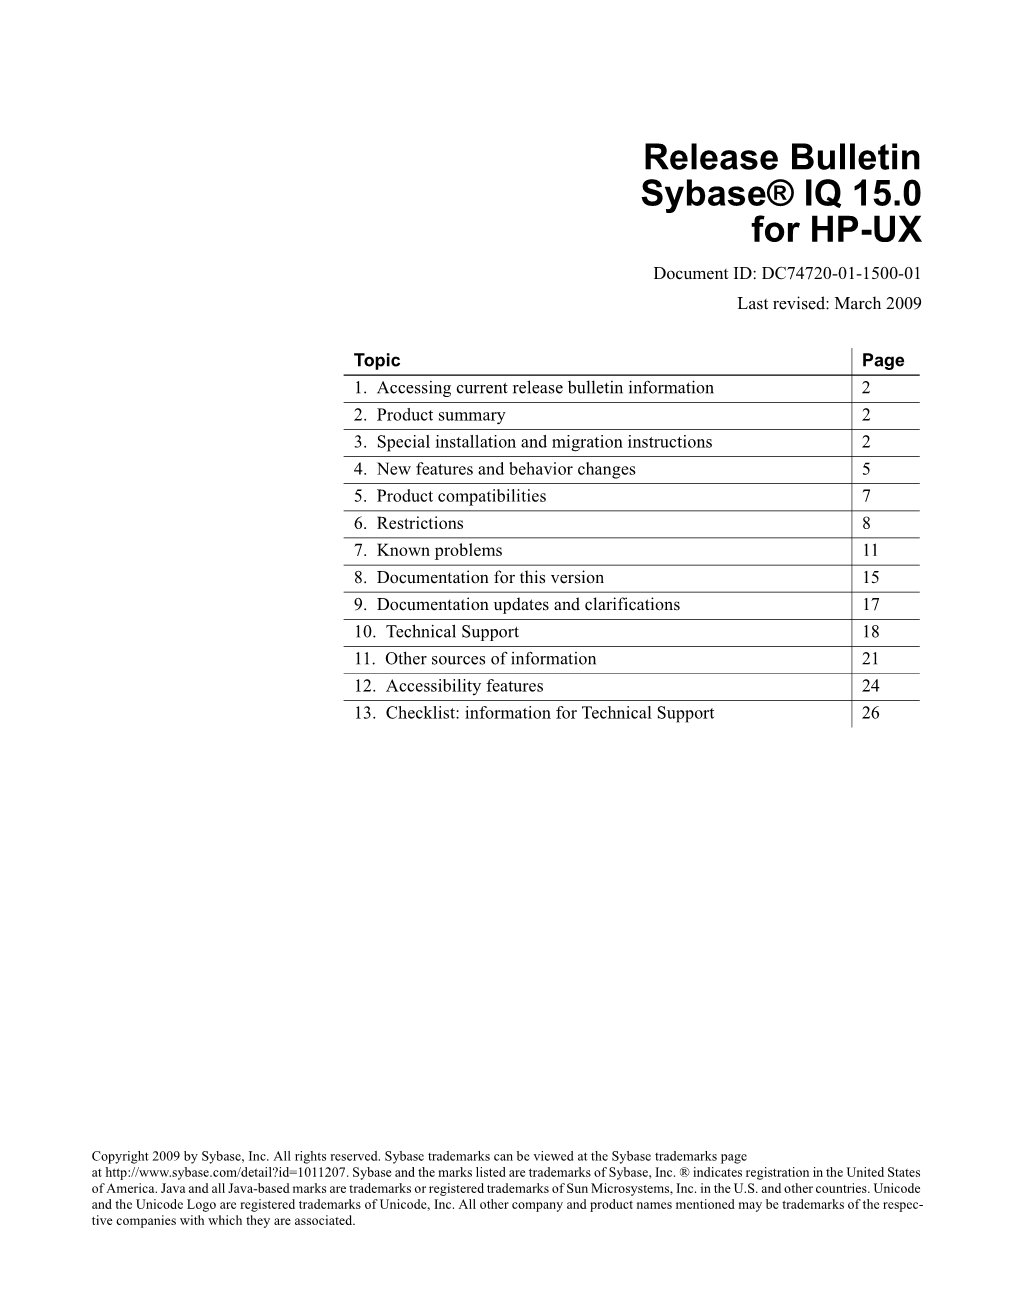 Release Bulletin Sybase® IQ 15.0 for HP-UX Document ID: DC74720-01-1500-01 Last Revised: March 2009